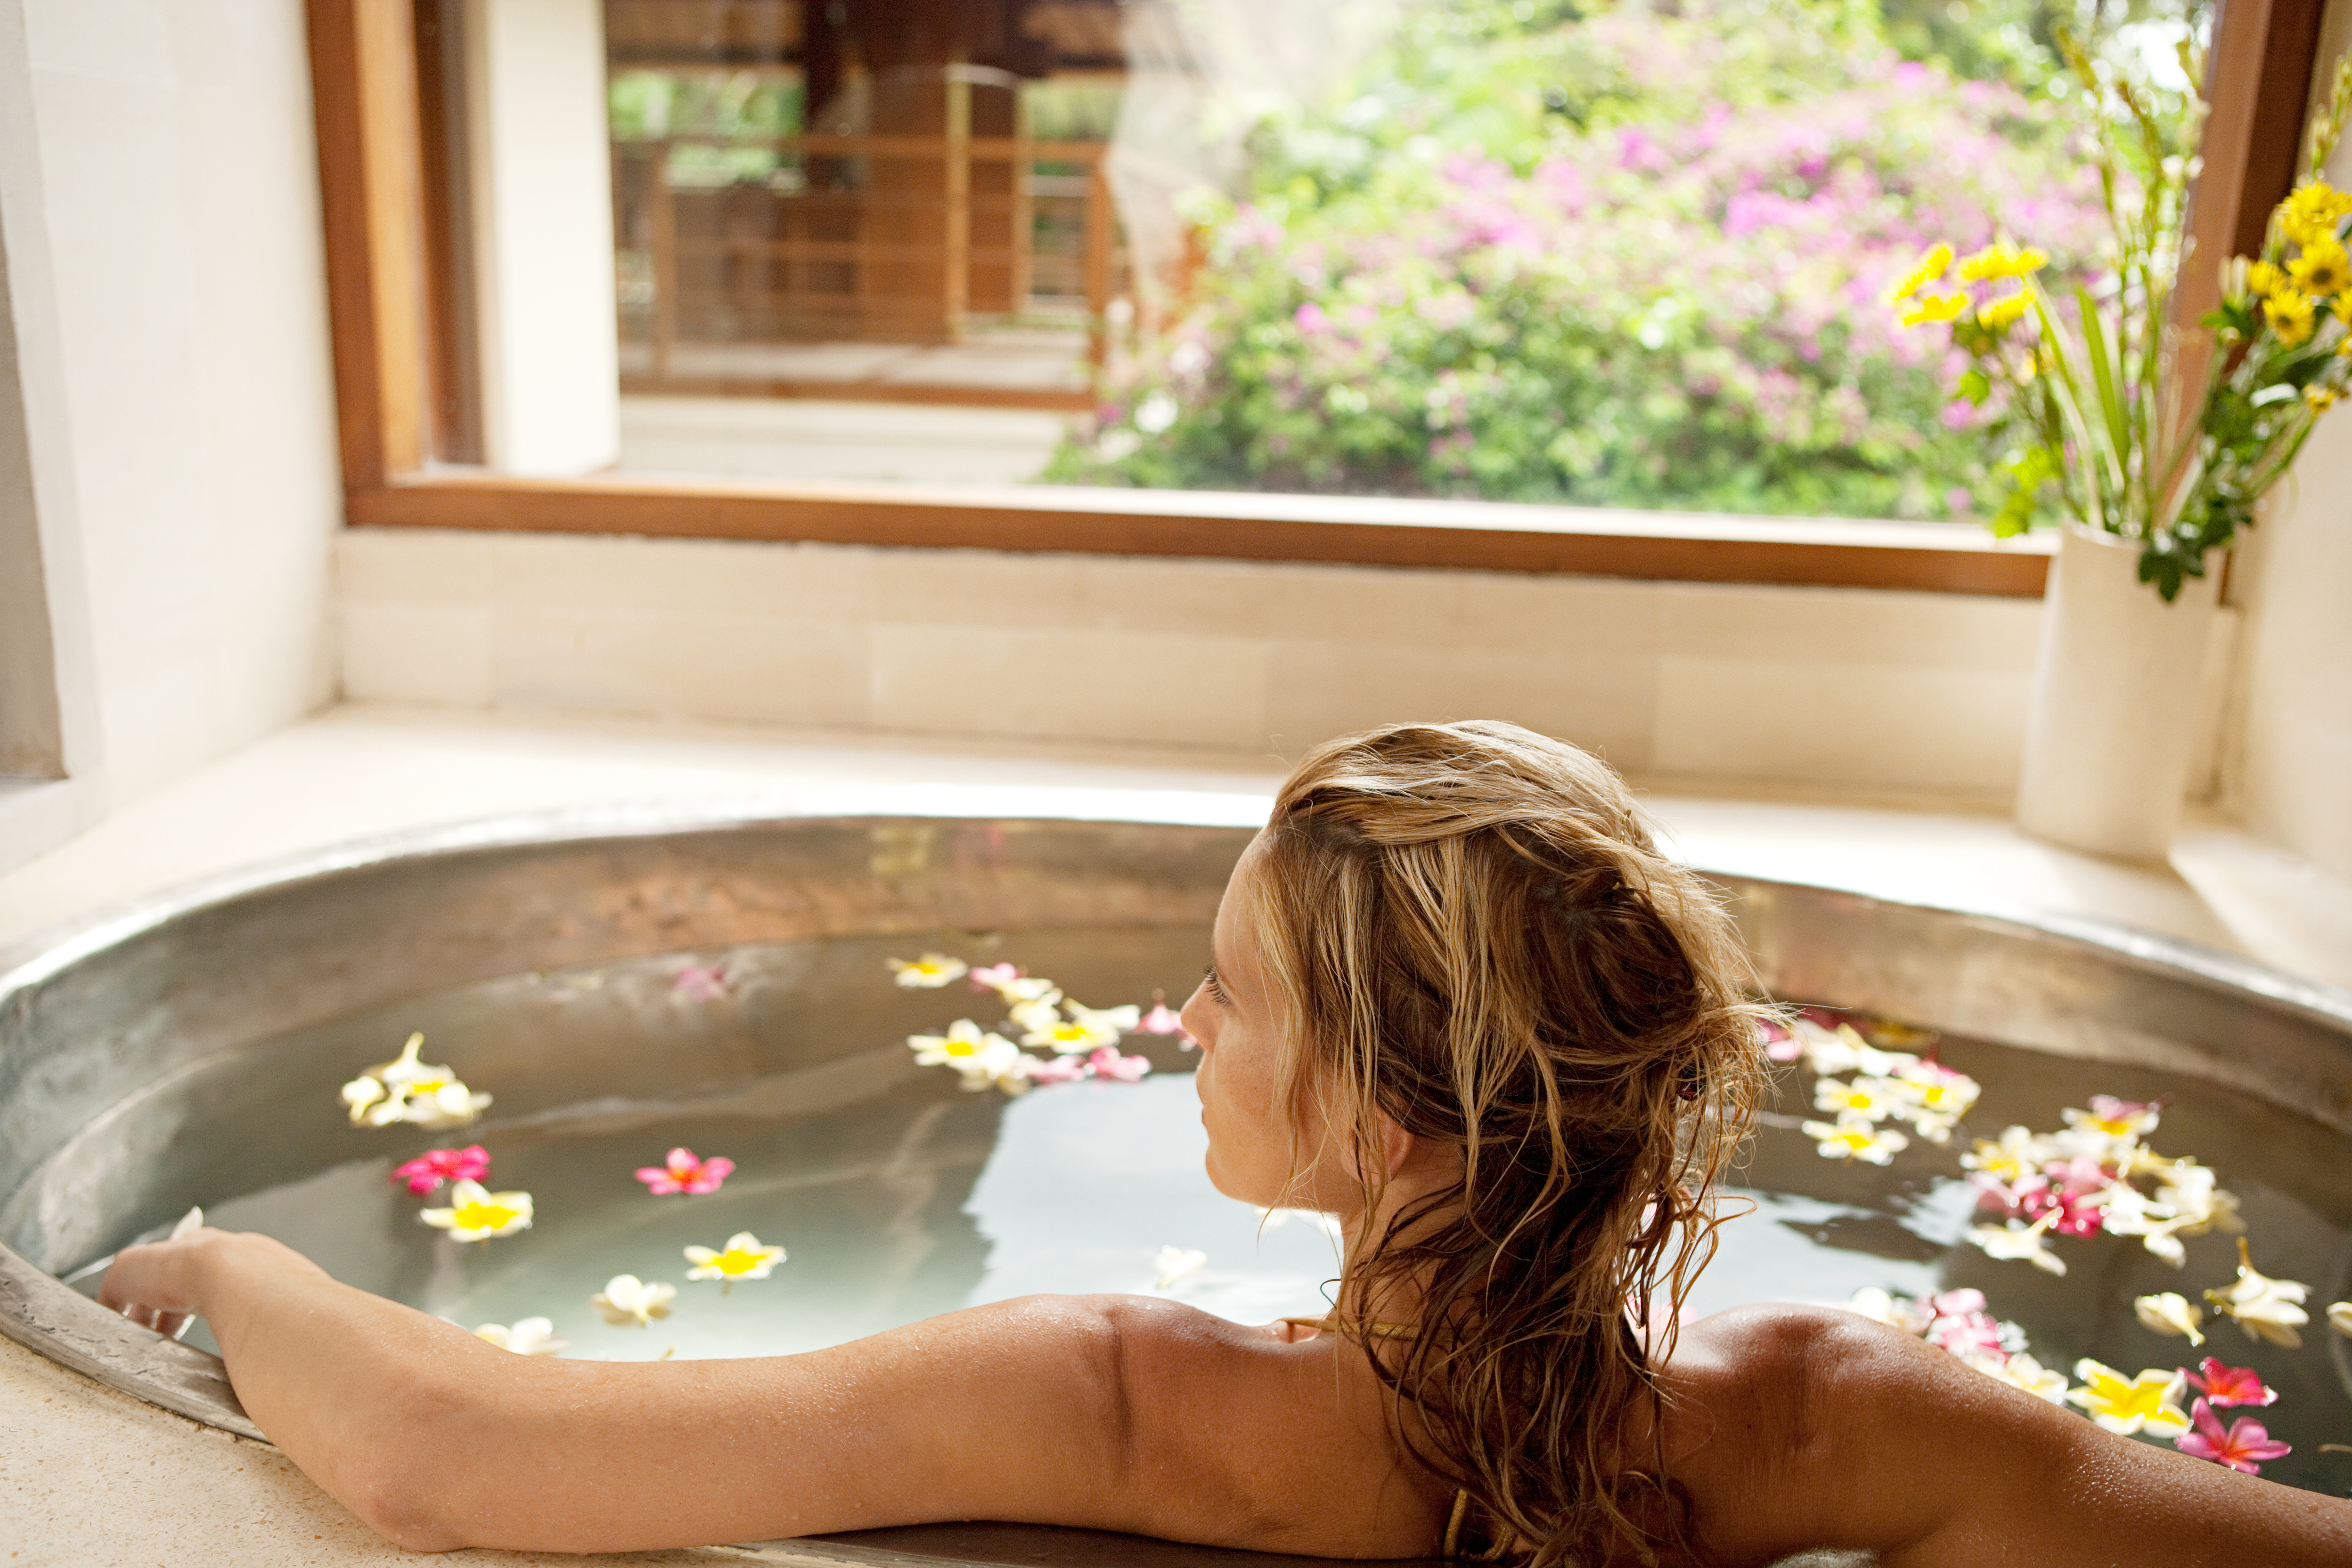 Back view of a young woman bathing in a health spa's flower bath.